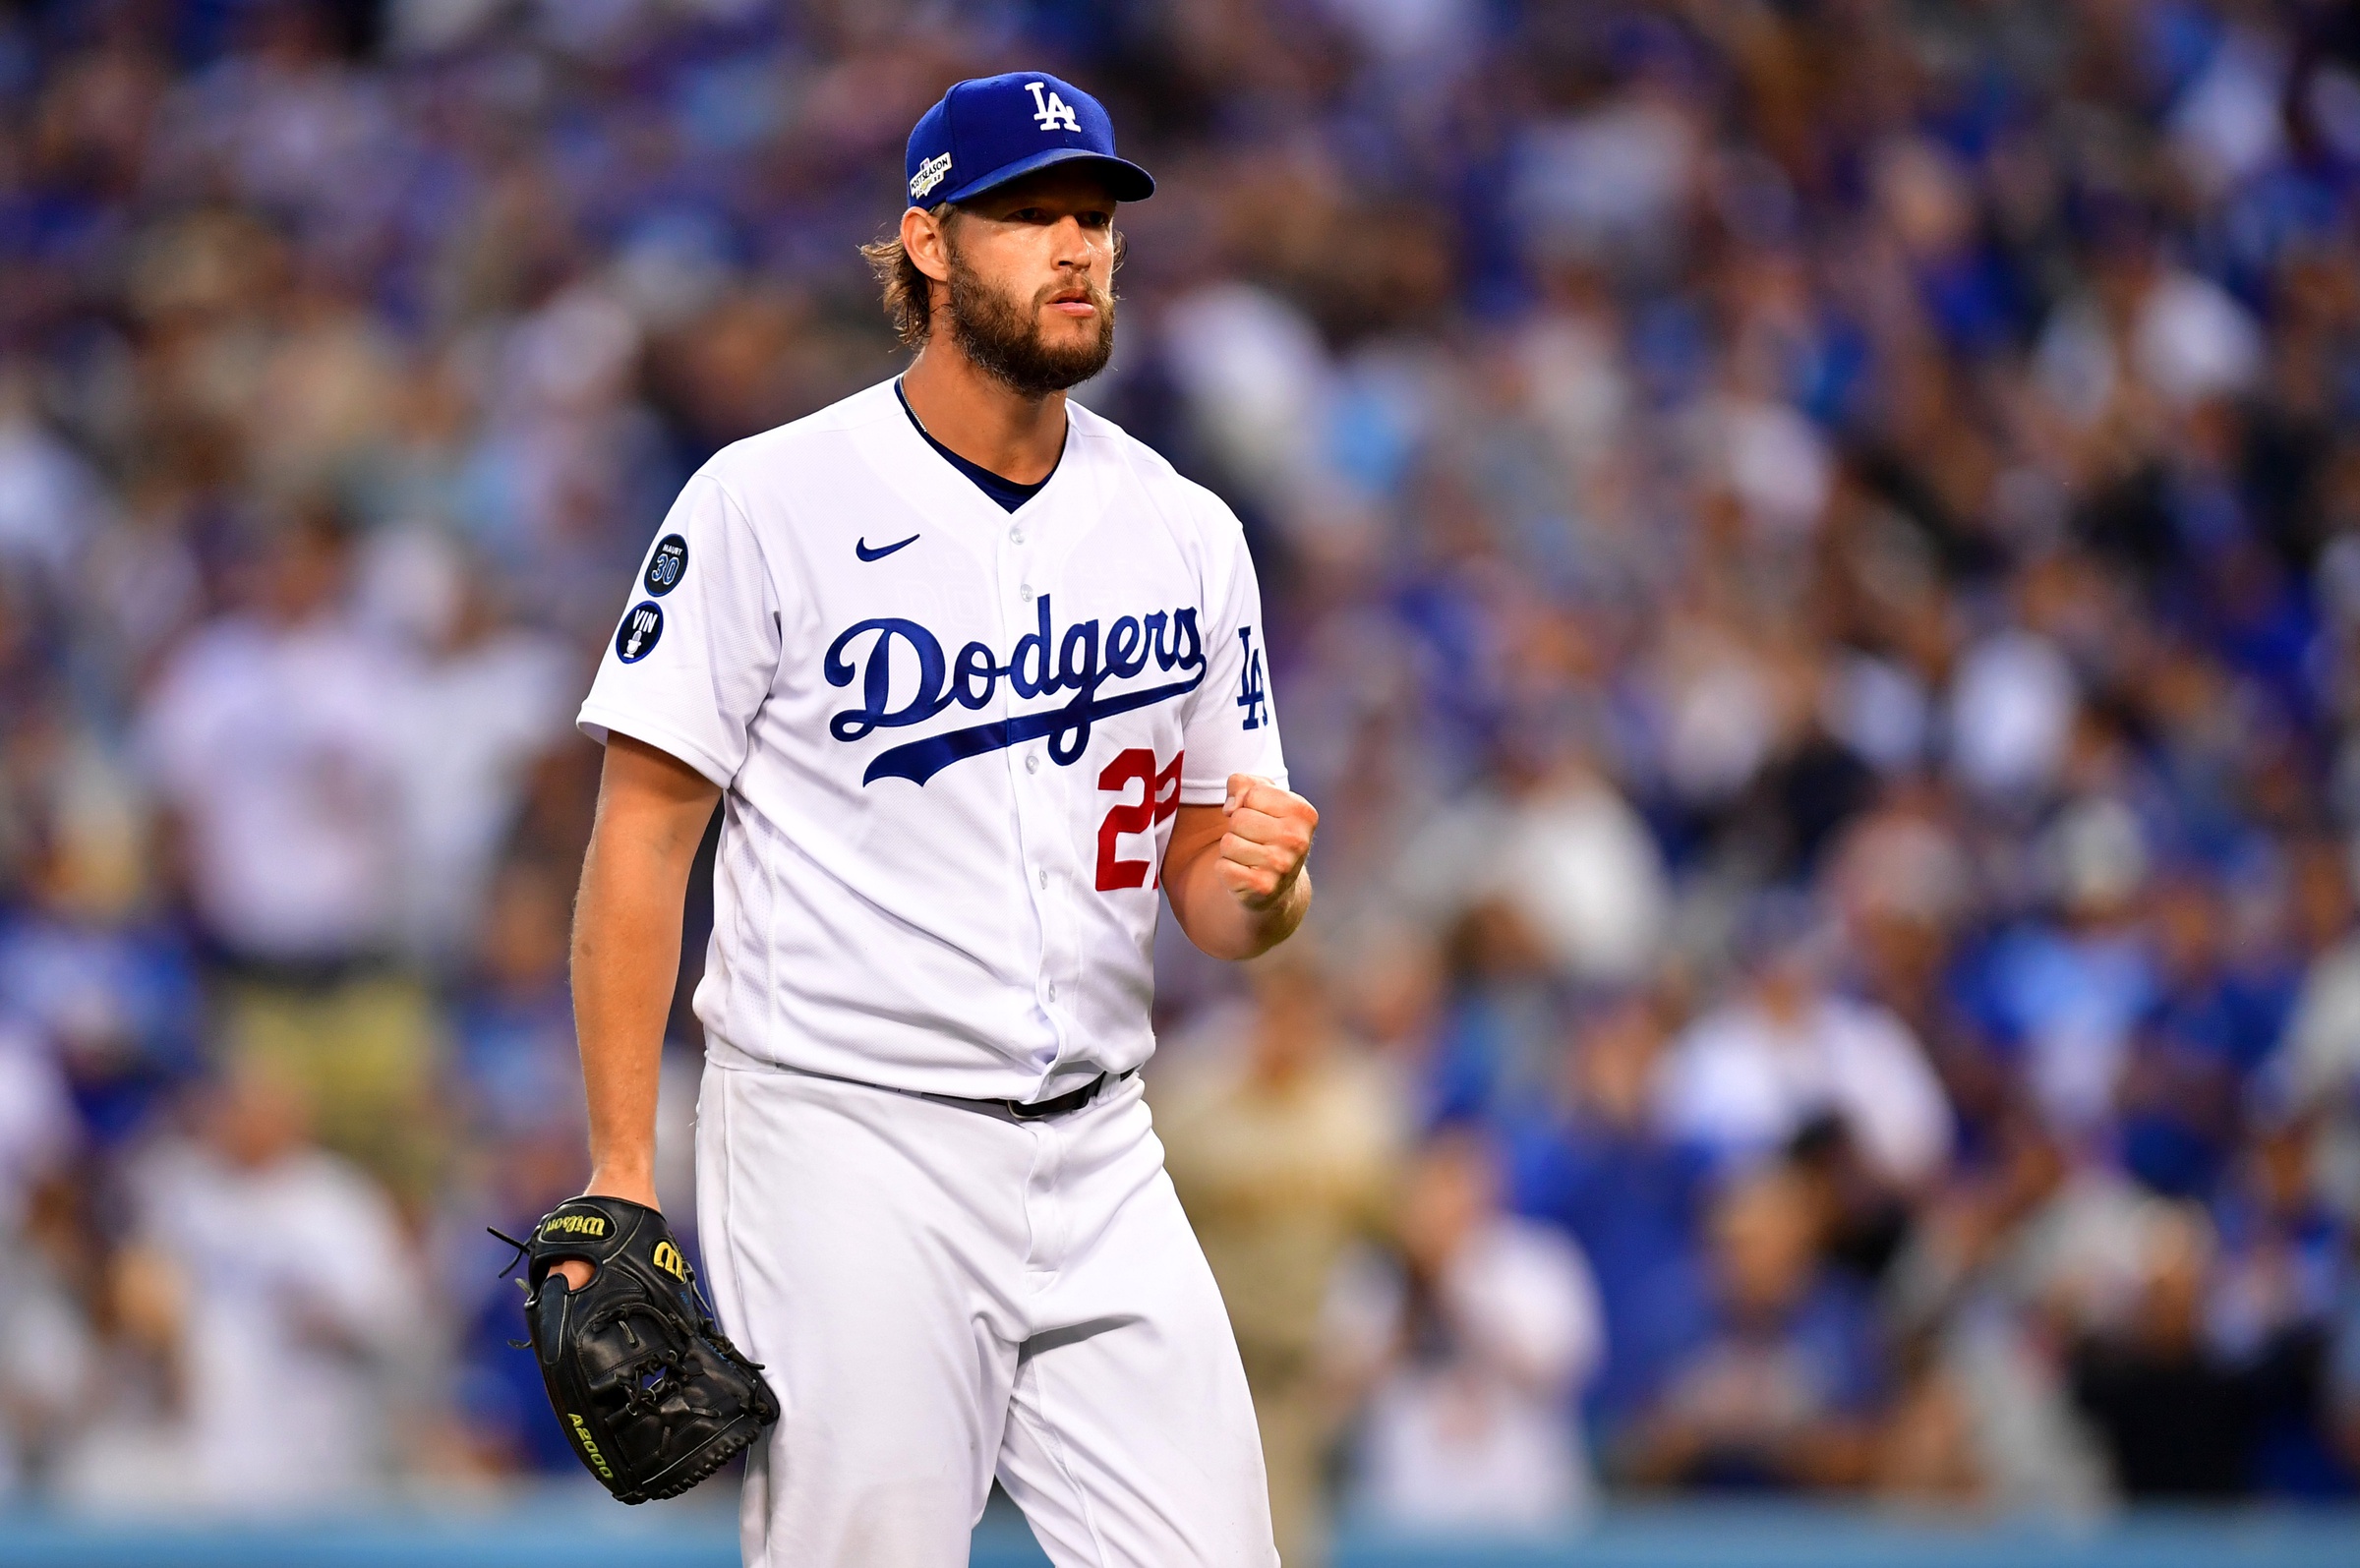 Will Clayton Kershaw retire? Latest news, updates on Dodgers ace's